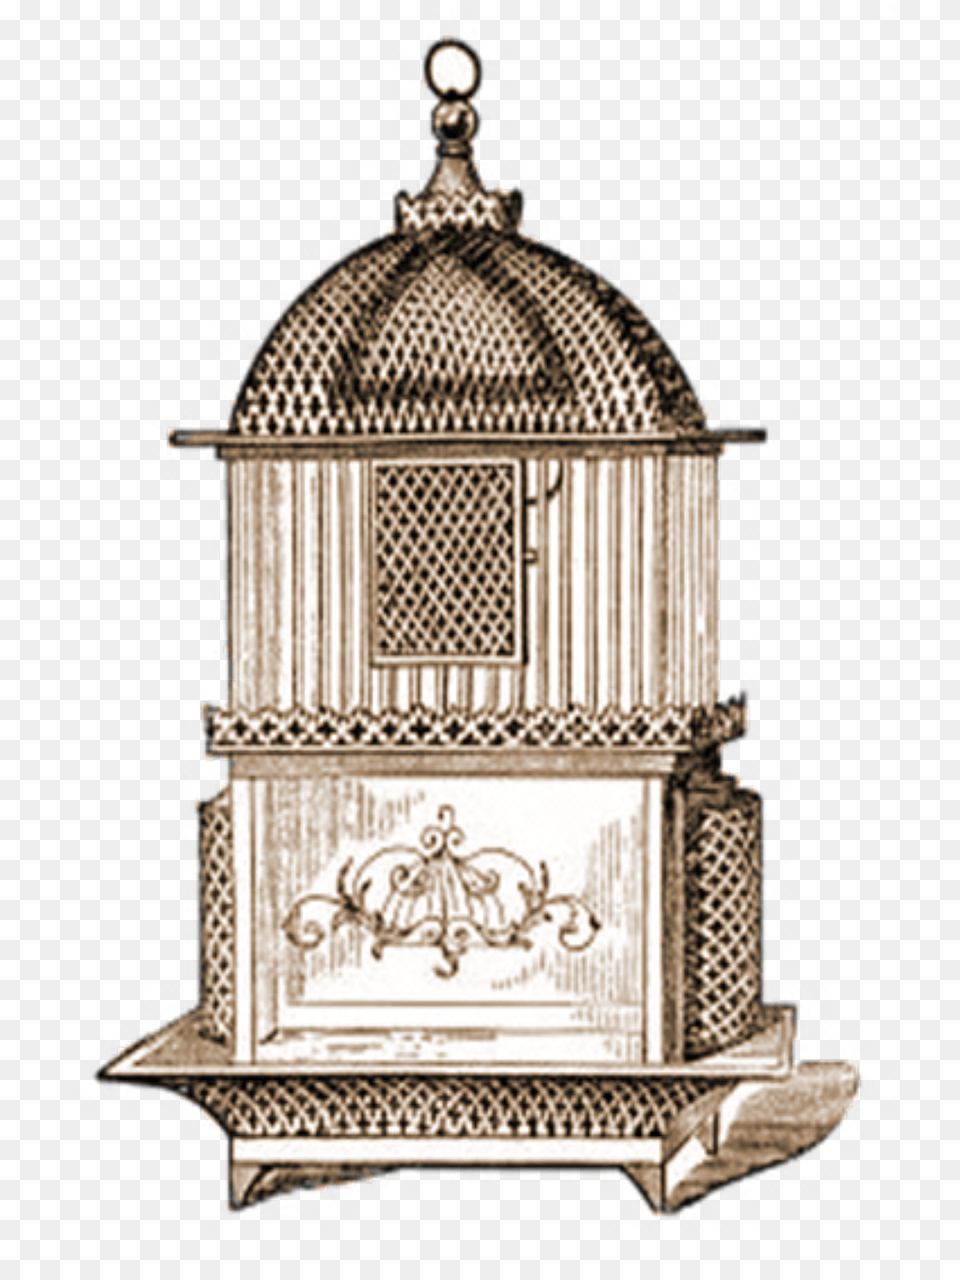 Bird Cage Transparent Element Morgan Harper Nichols For The Highs, Lamp, Architecture, Building, Monastery Free Png Download